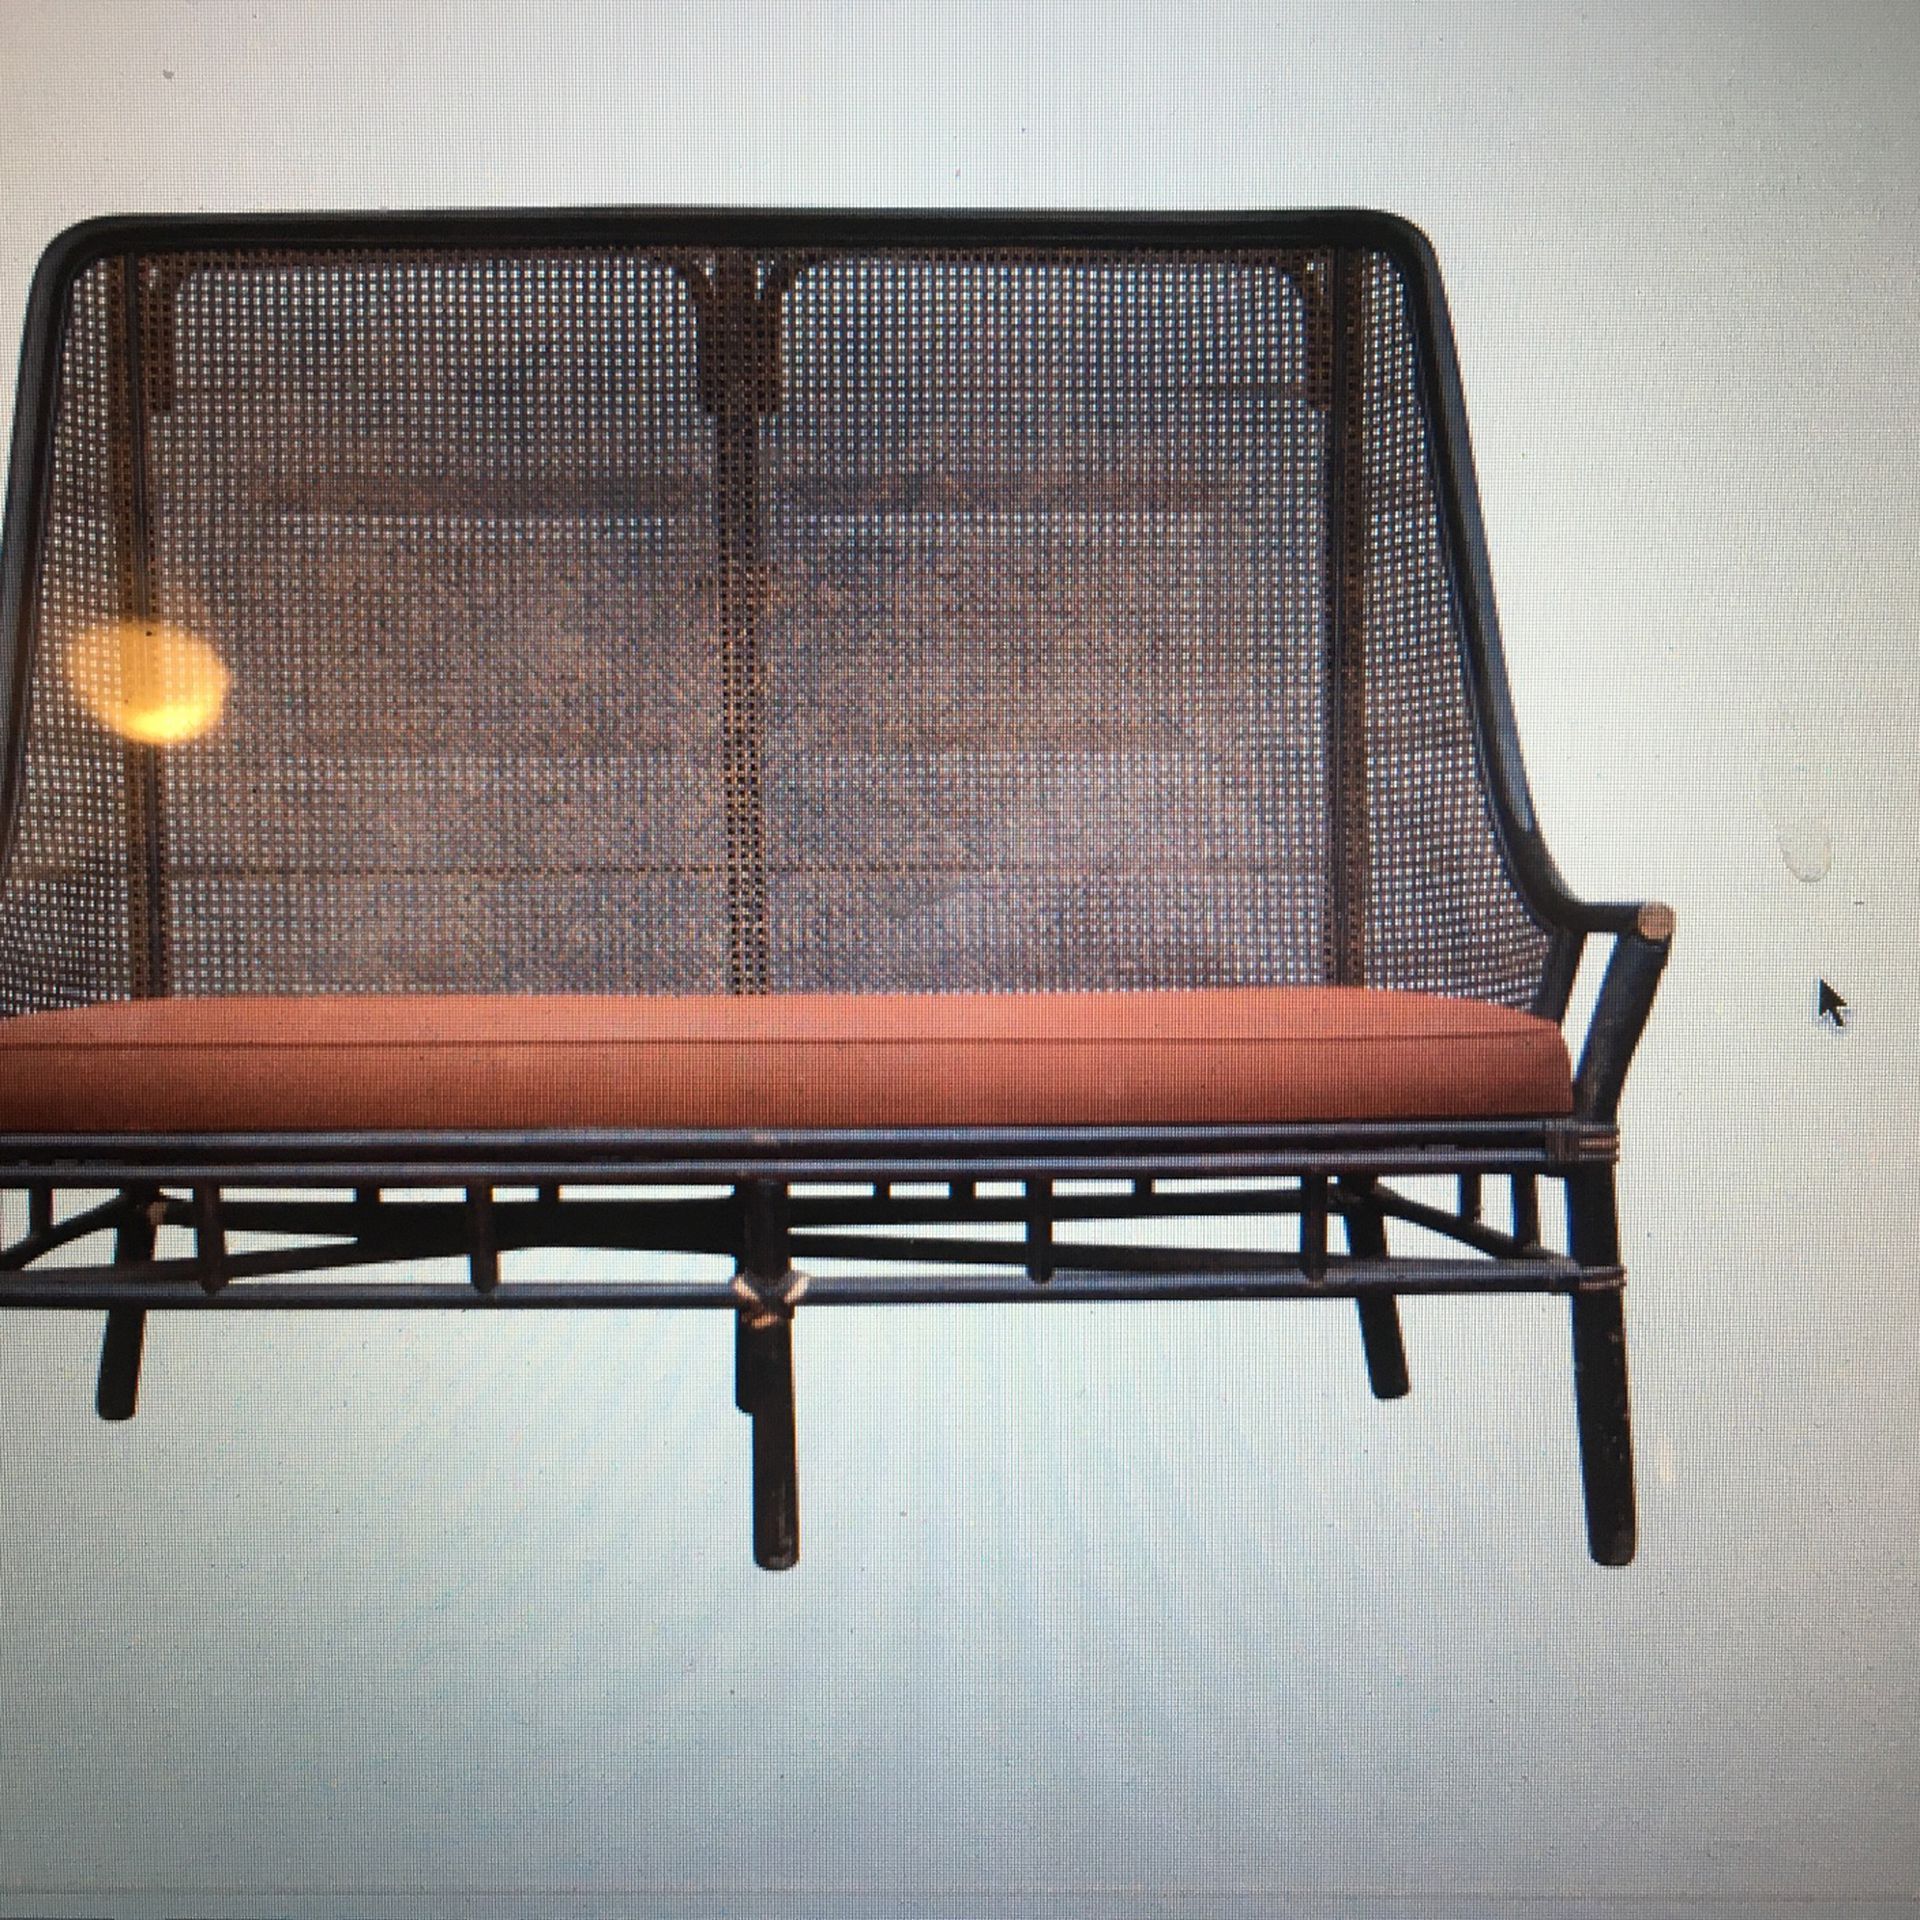 Vintage Tropi-Cal High-back Rattan Cane Loveseat Bench from the Wichita BOMBAY BICYCLE CLUB  McGuire MCM McCobb Ficks Reed Hollywood Regency style